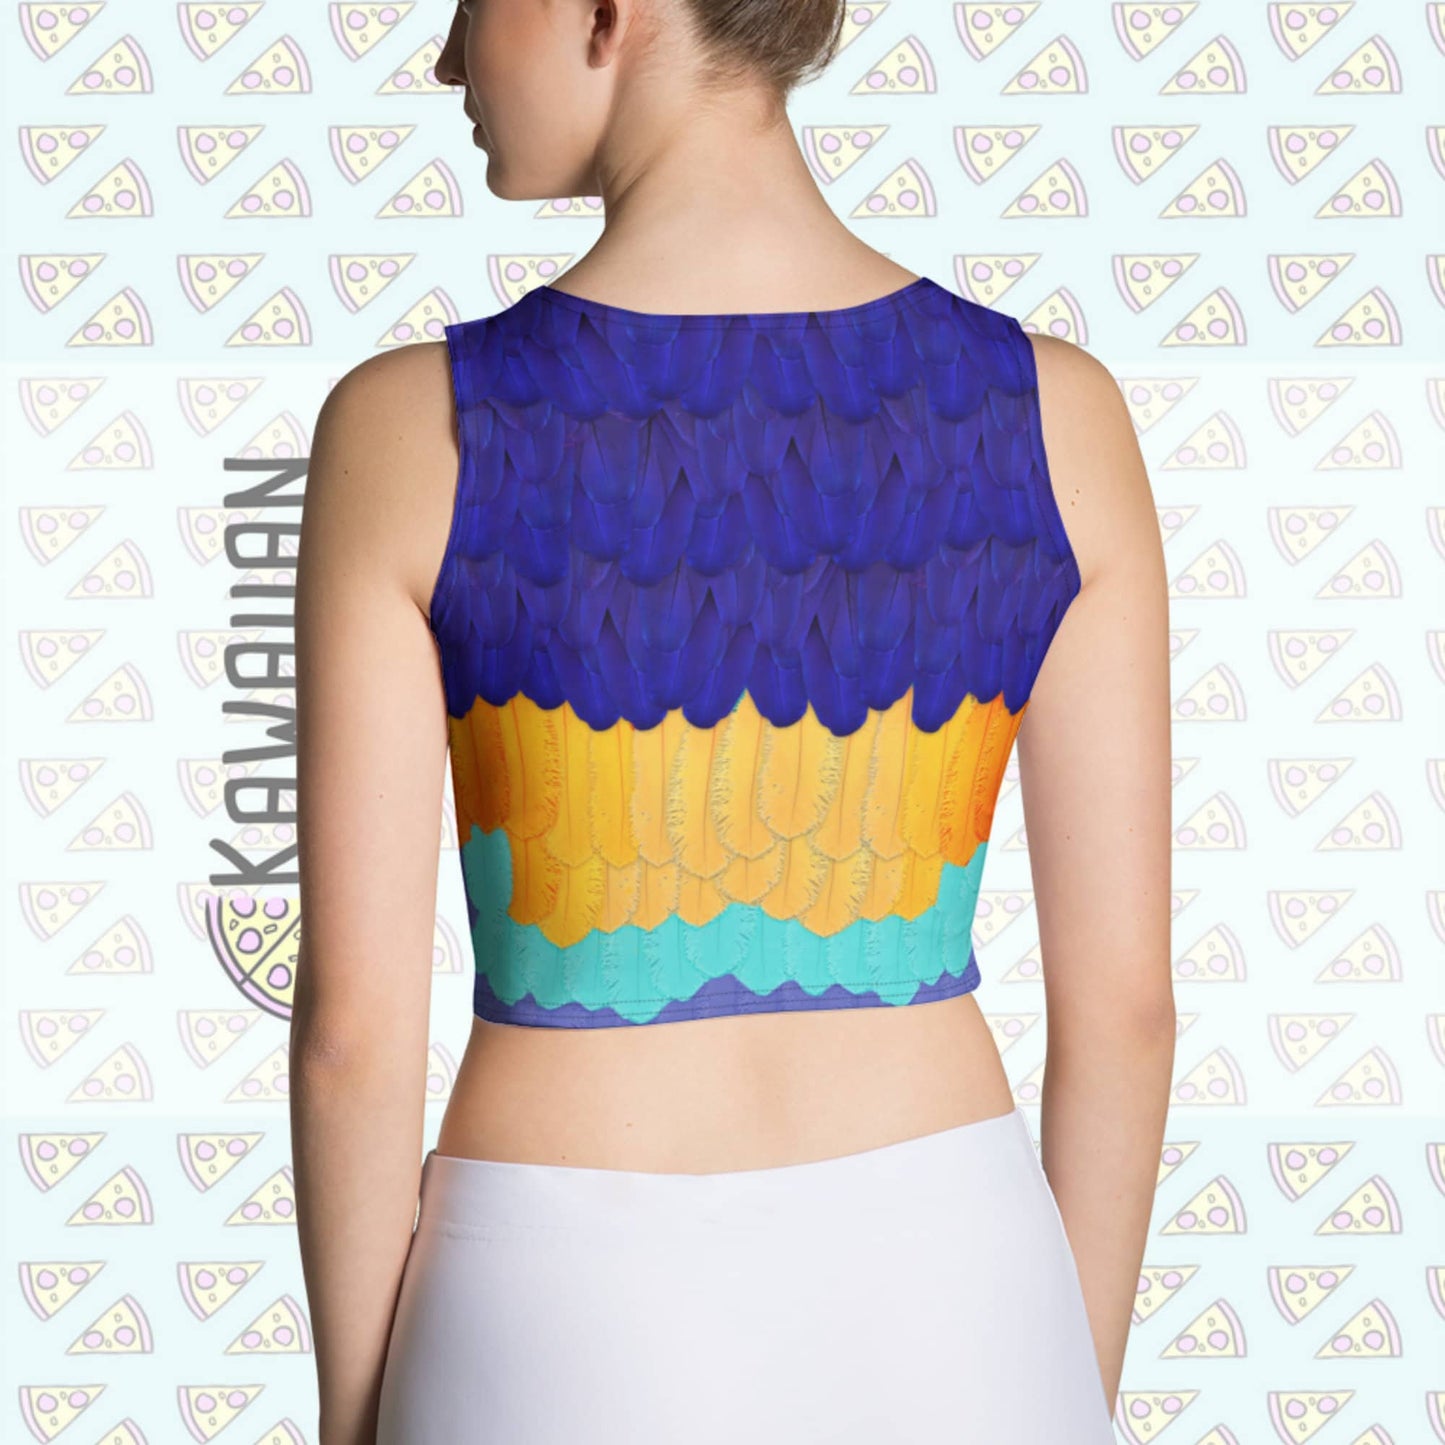 RUSH ORDER: Kevin Inspired Crop Top